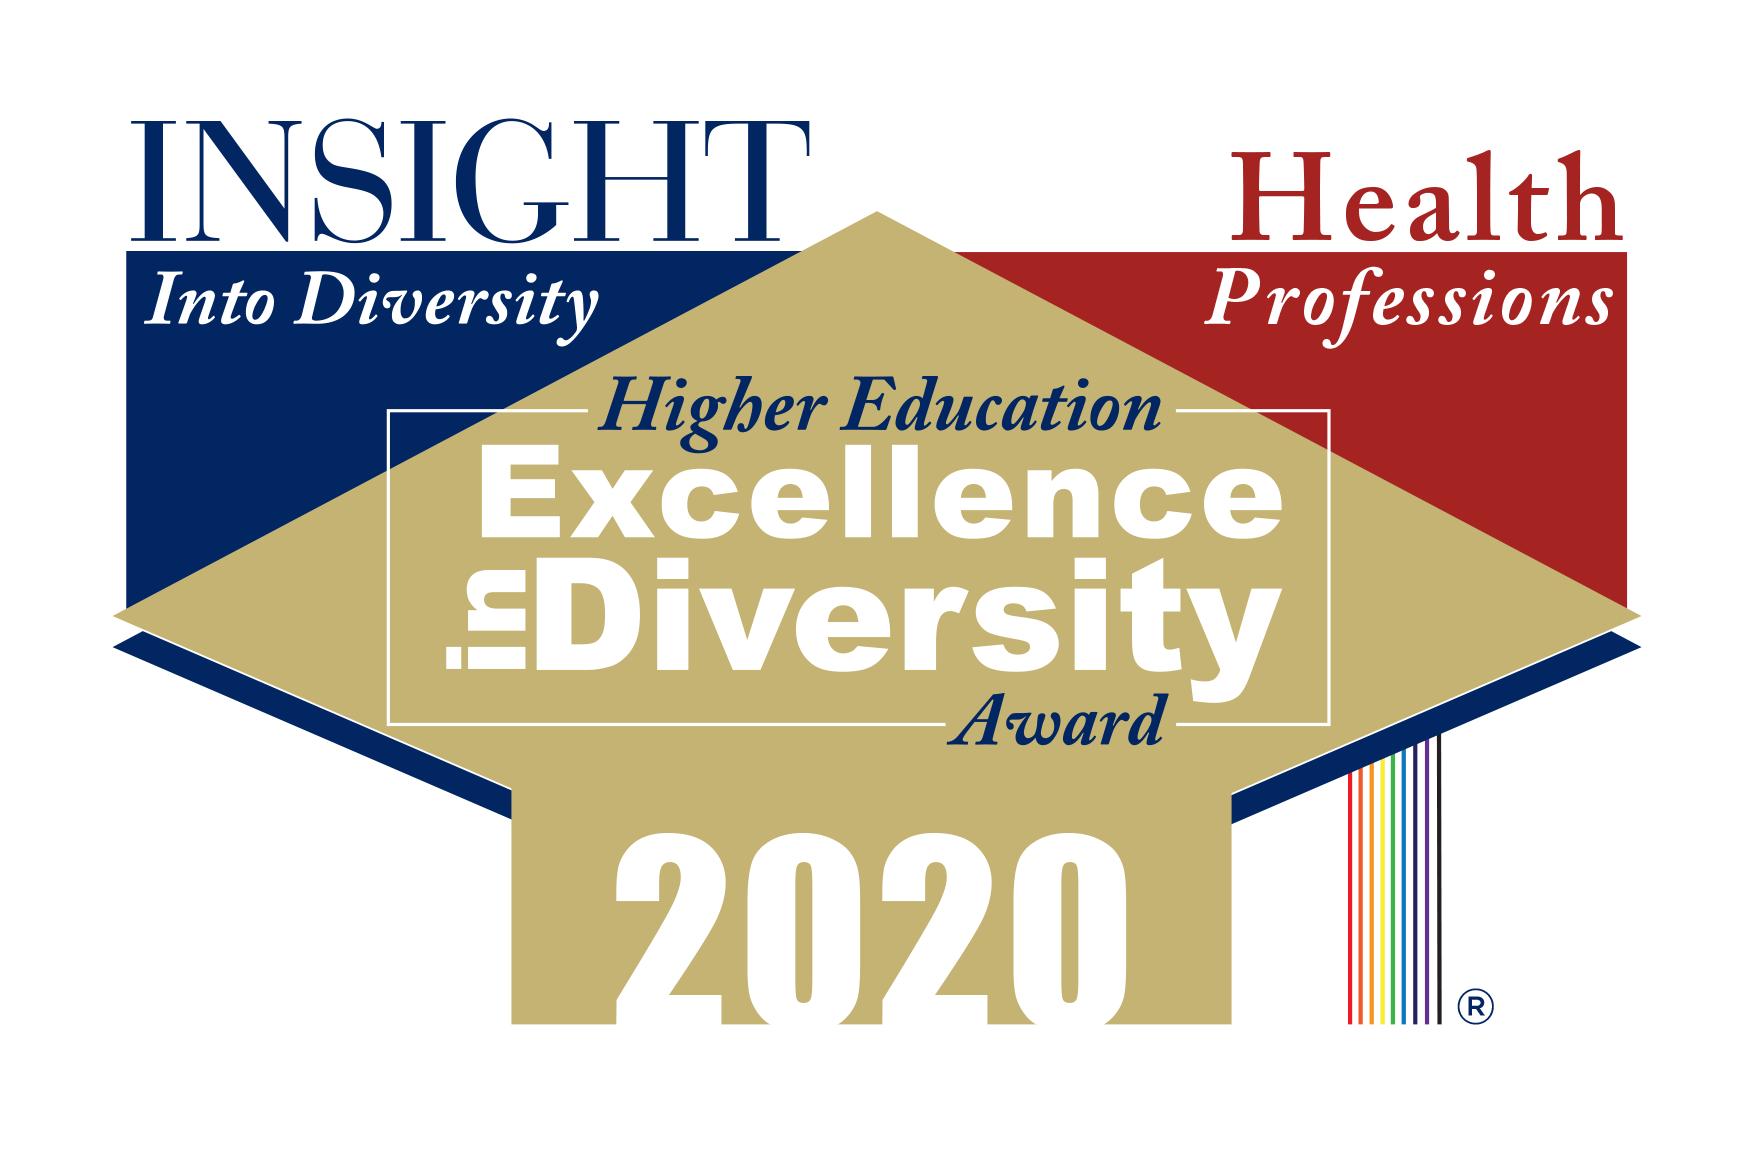 Insight Into Diversity Health Professions Higher Education Excellence in Diversity Award 2020